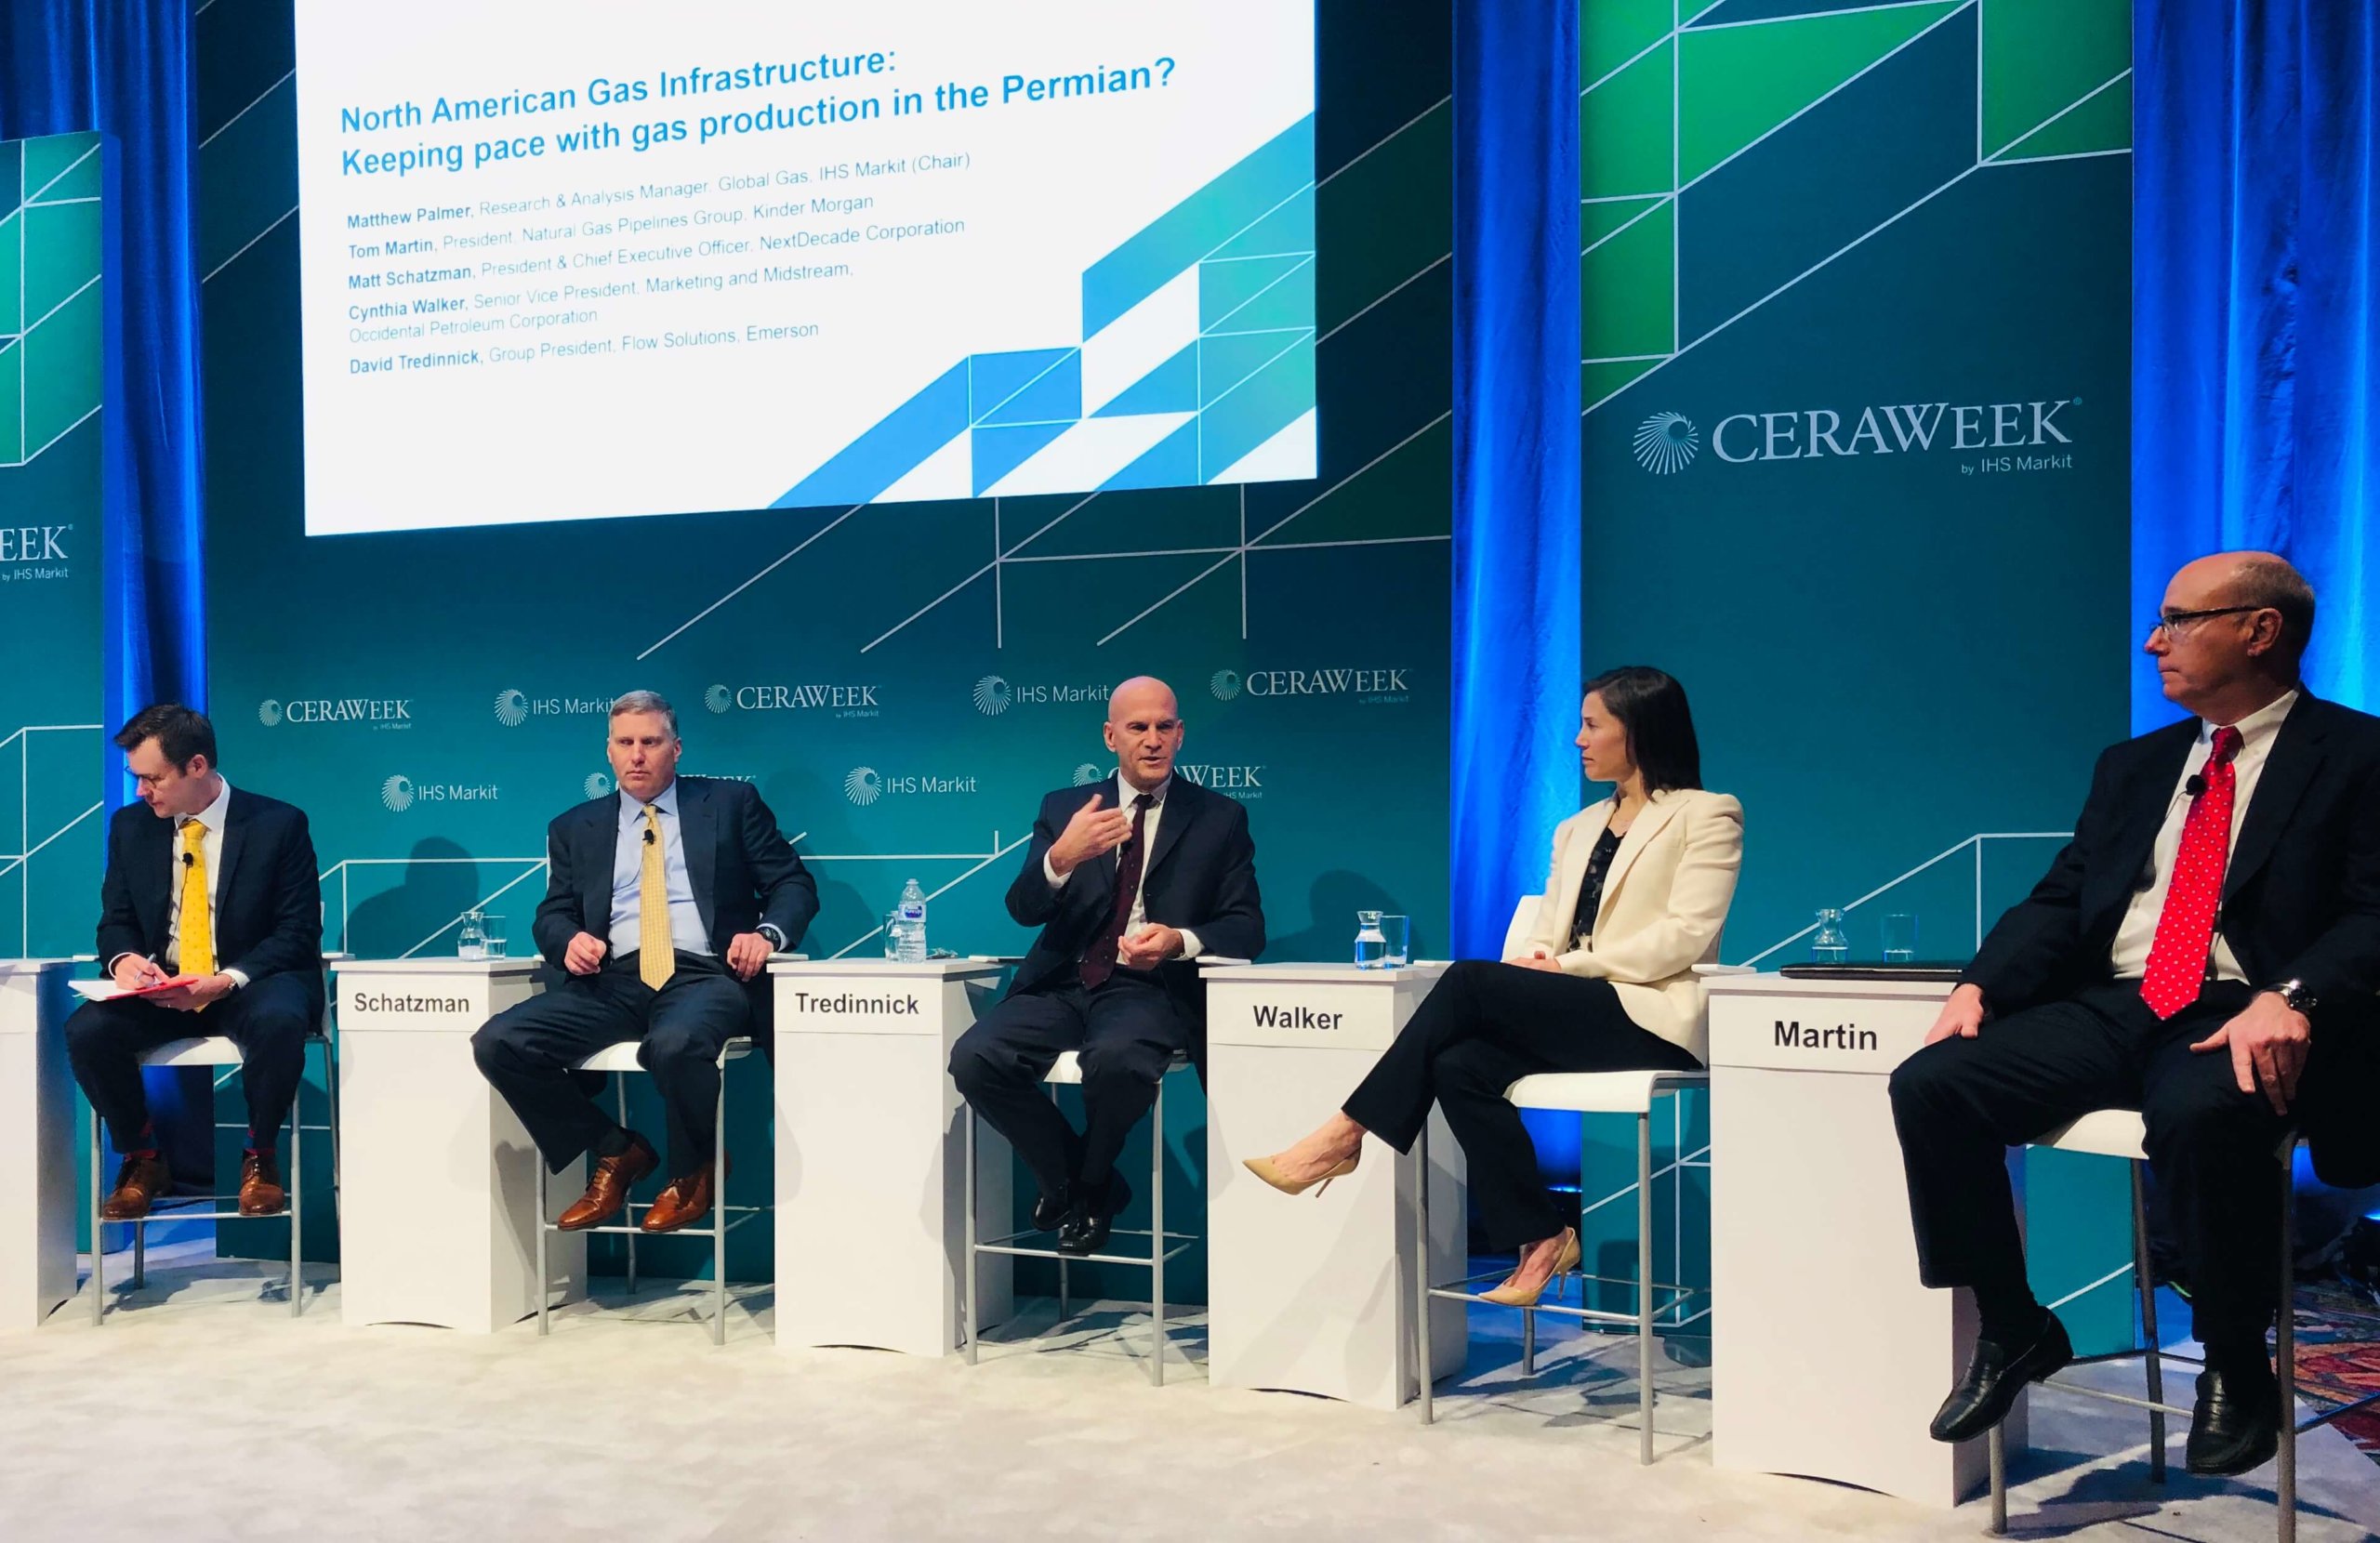 Emerson's Dave Tredinnick on Permian Basin Gas Infrastructure at CERAWeek 2019